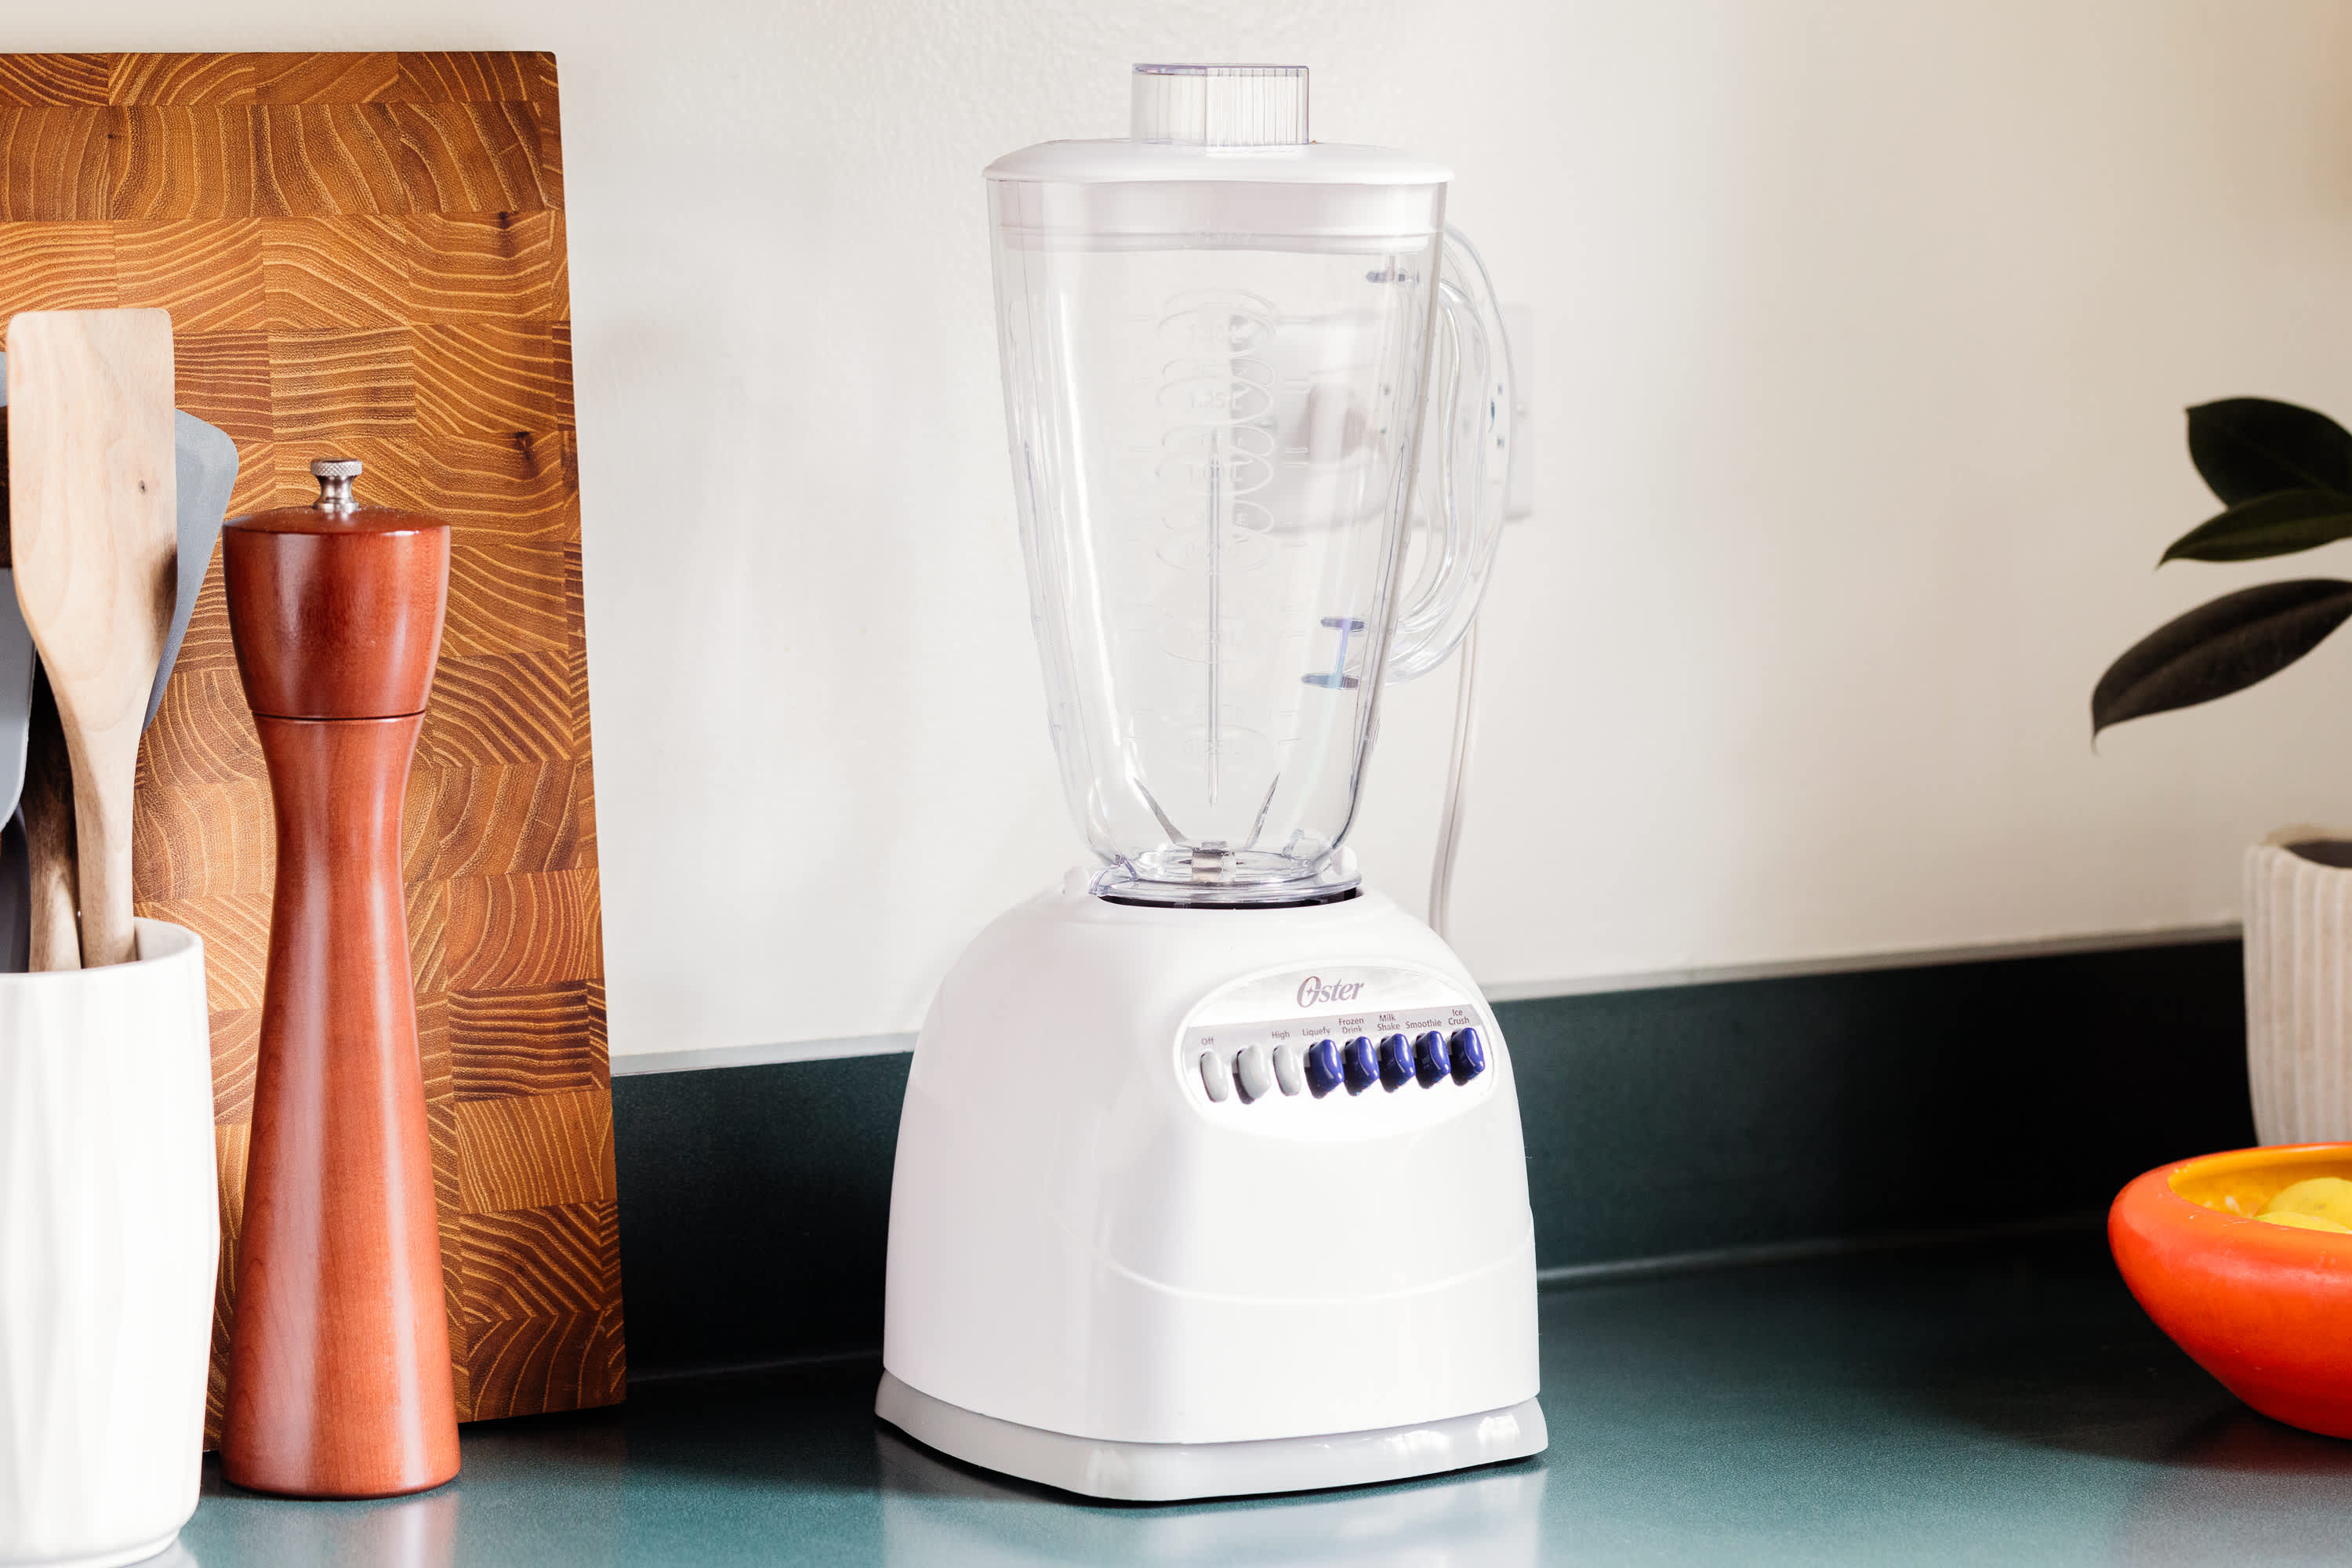 The Simple Hack To Clean A Foggy Blender Using Baking Soda And Vinegar